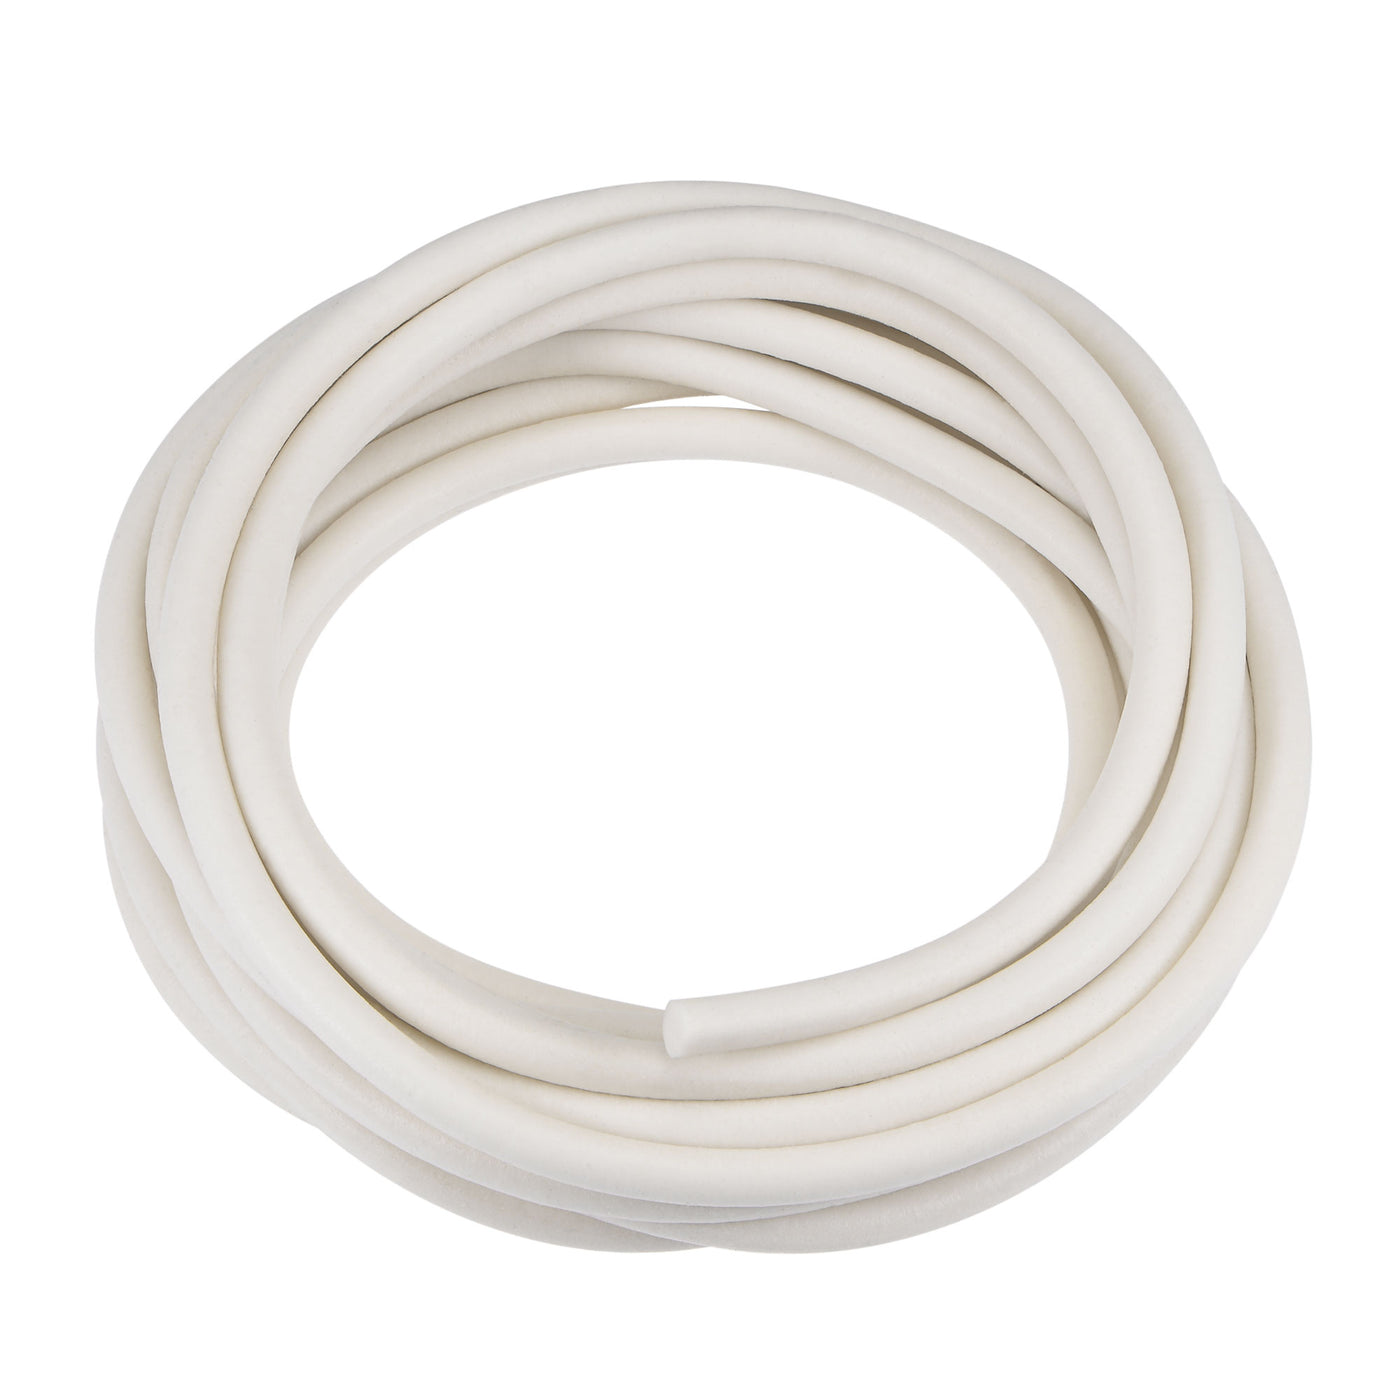 uxcell Uxcell 1/4"(6mm) Soft Silicone Bending Insert Tube for Rigid Tubing 16ft White